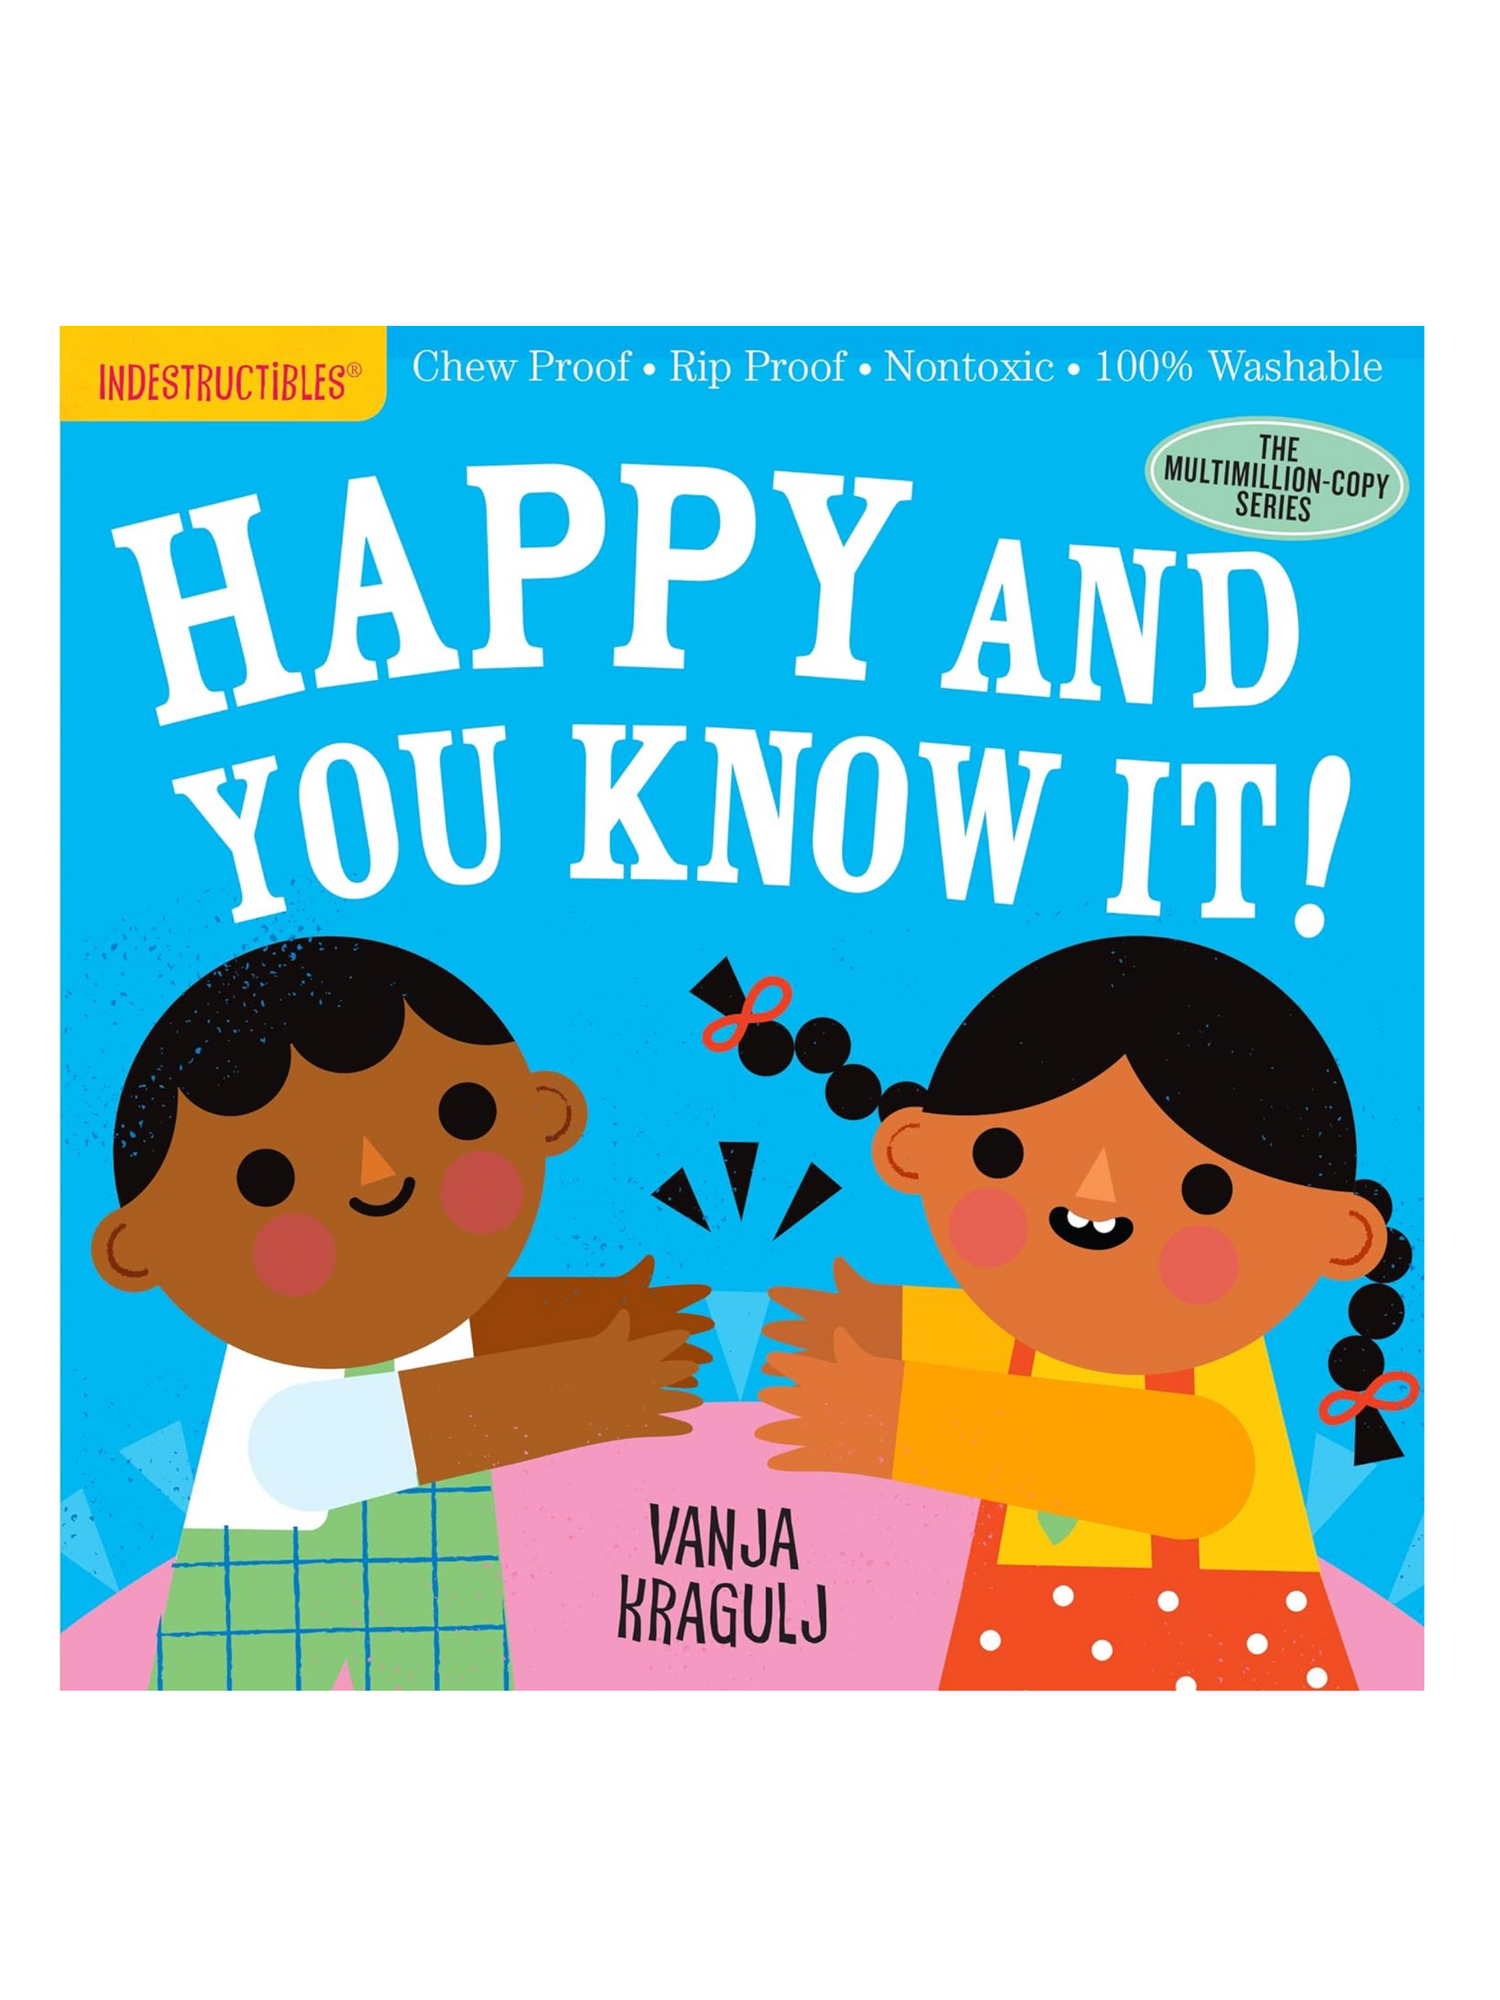 HAPPY AND YOU KNIOW IT THE ORIGINAL INDESTRUCTIBLES BOOKS - THE LITTLE EAGLE BOUTIQUE